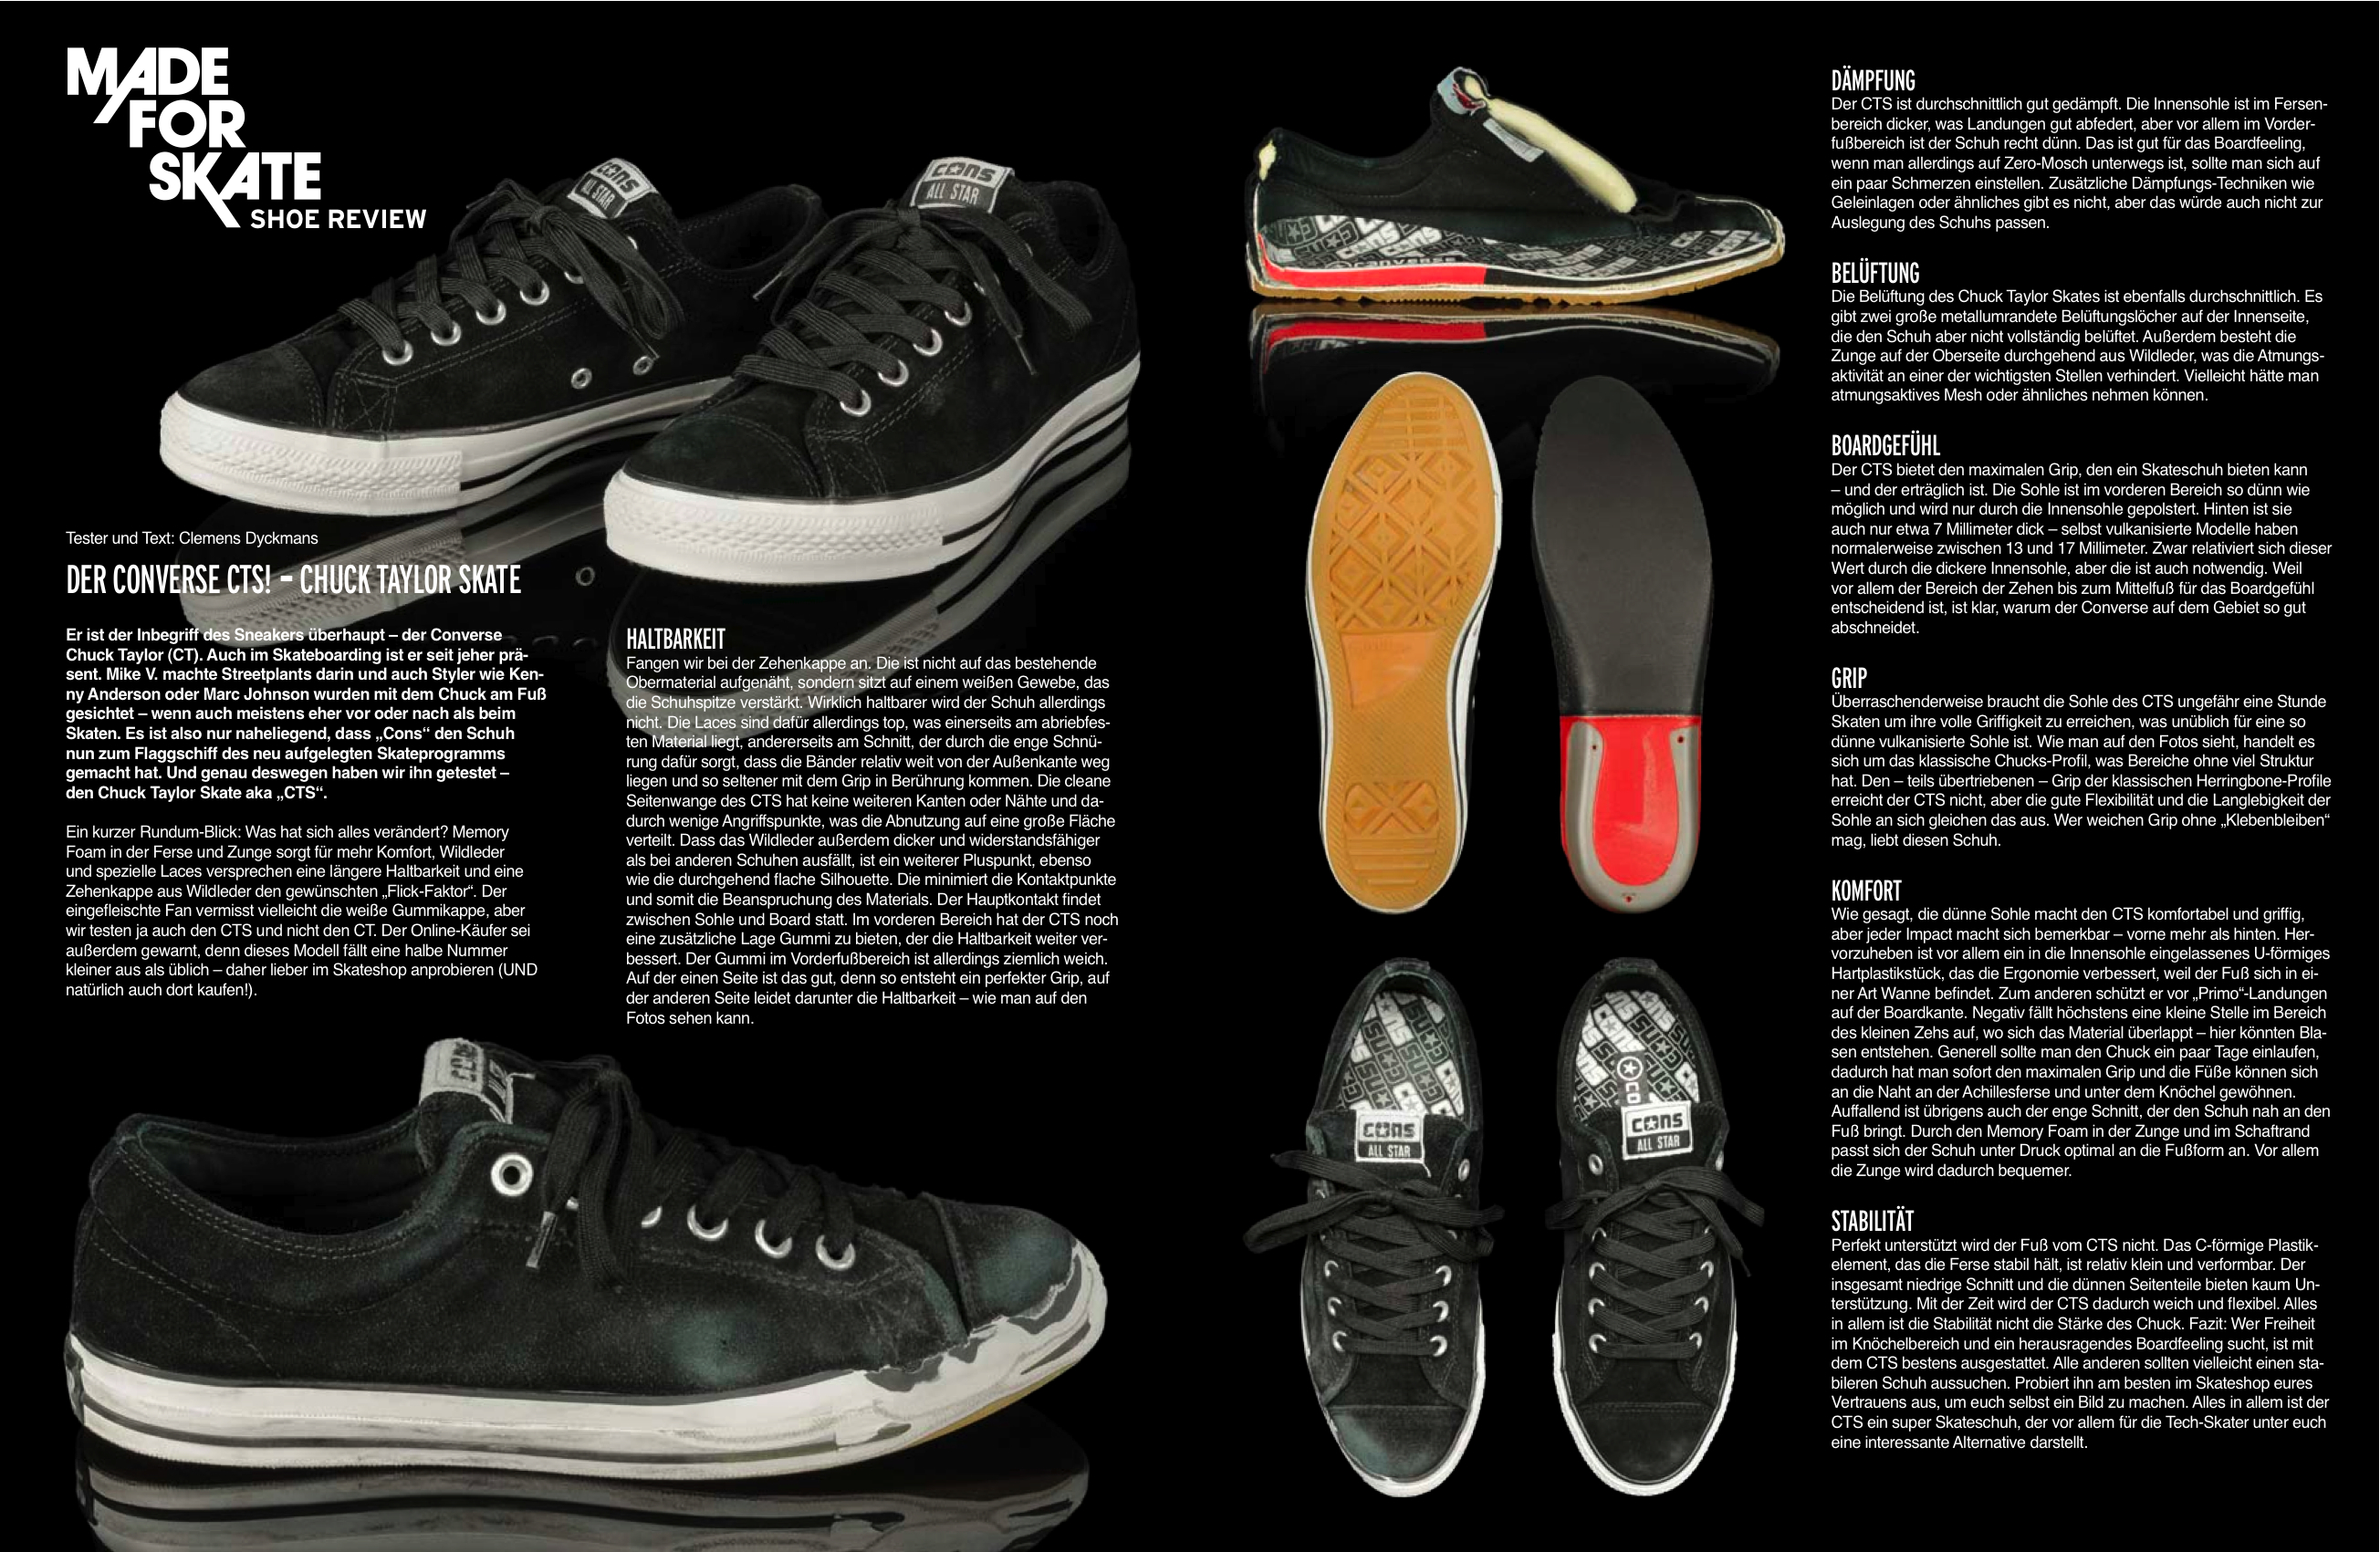 Converse CTS - Weartested - detailed skate shoe reviews